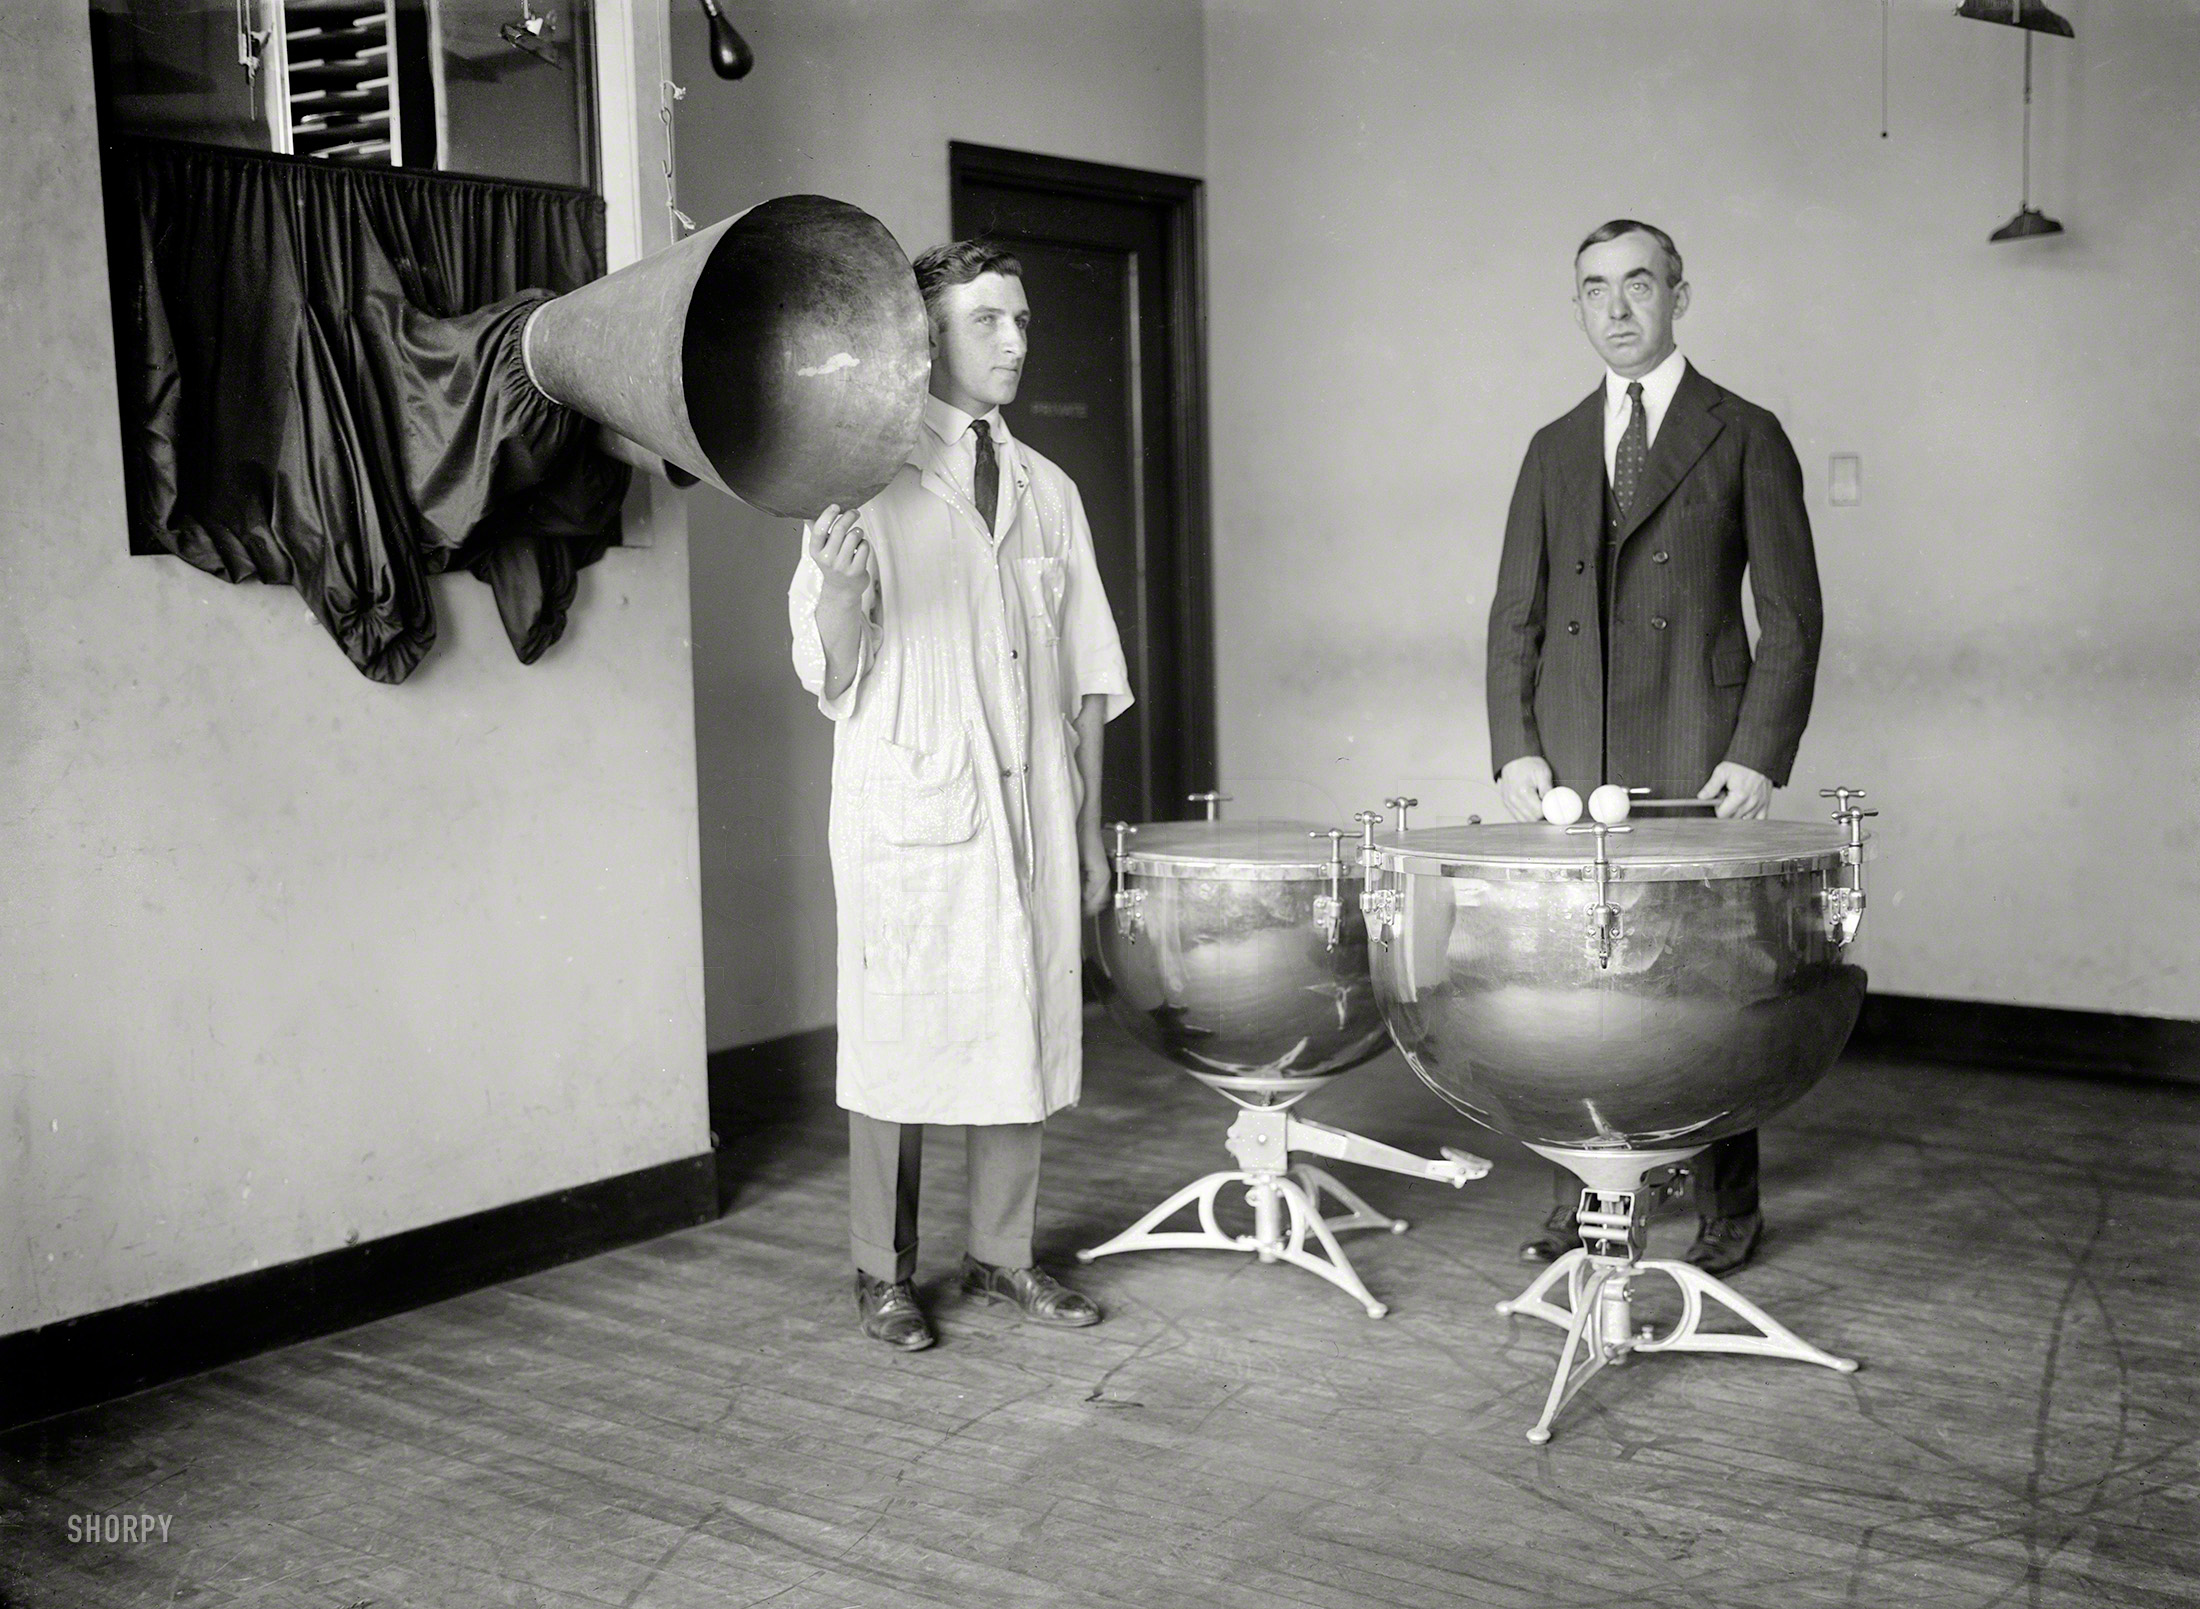 October 1922. New York. "Kopp" is all it says on this glass negative depicting a pair of kettledrums next to what might be a speaker horn or a mega-microphone. Bain News Service. View full size.